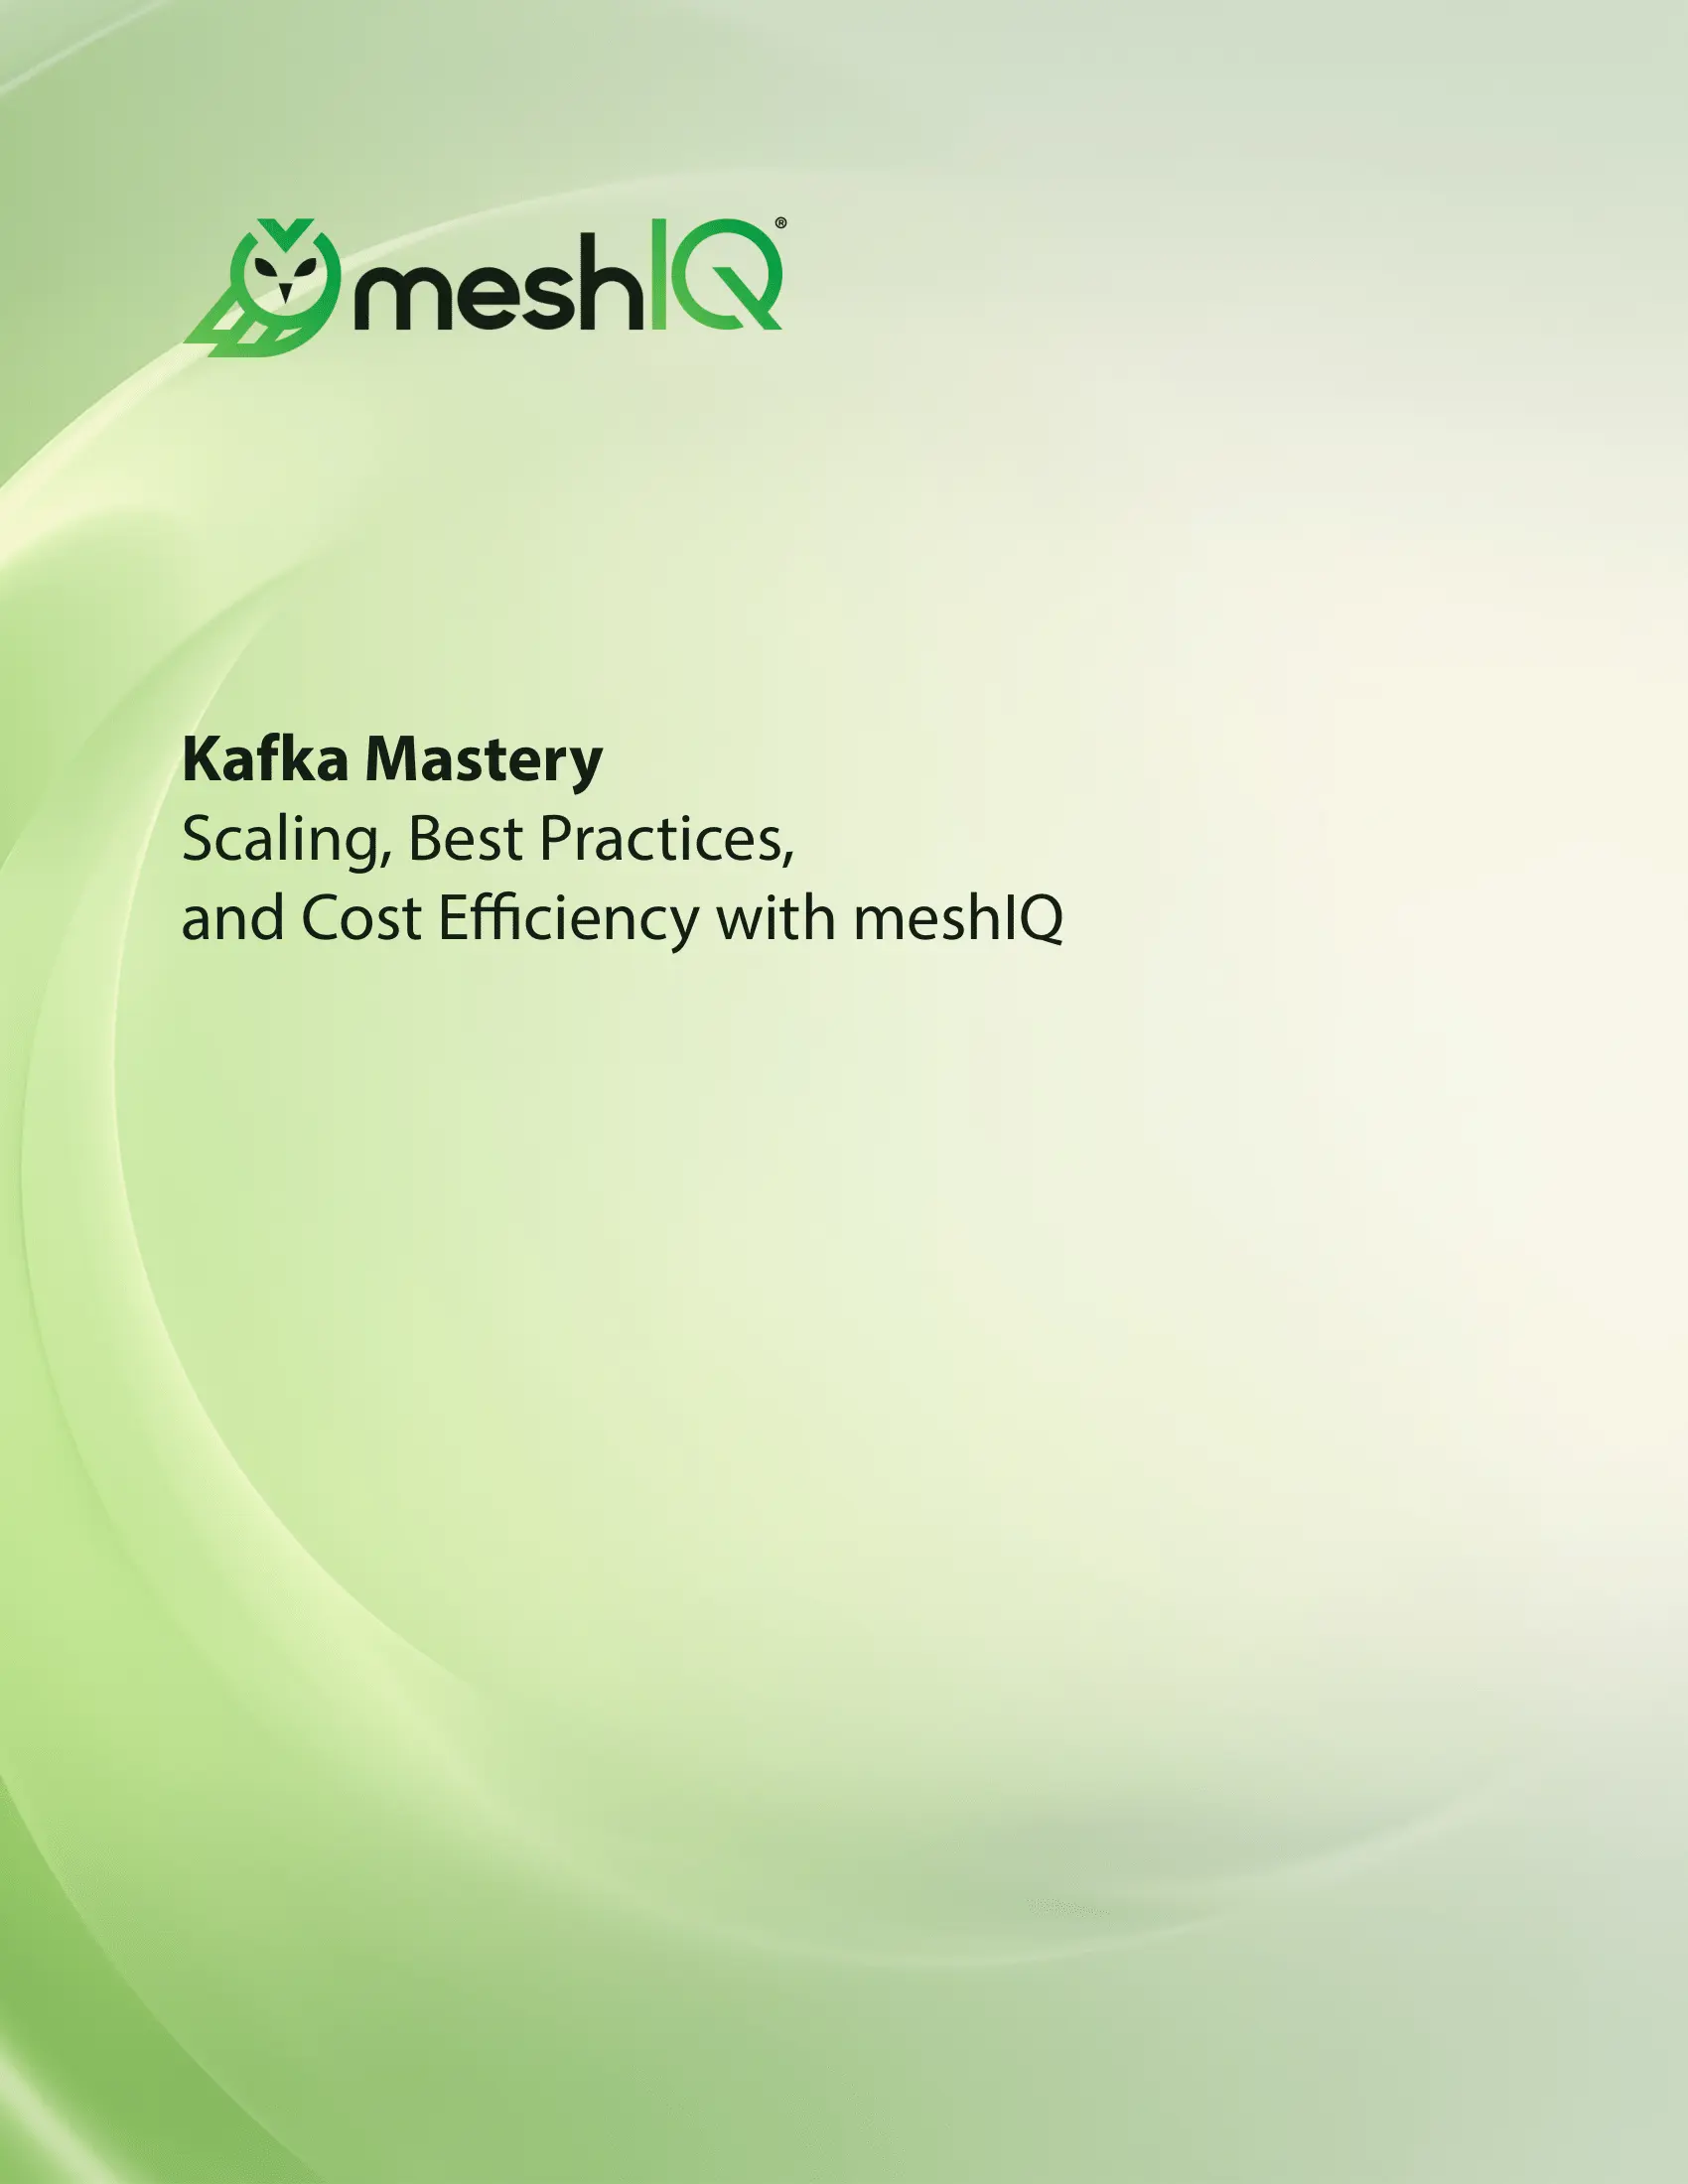 Kafka Master: Scaling, Best Practices, and Cost Efficiency | meshIQ